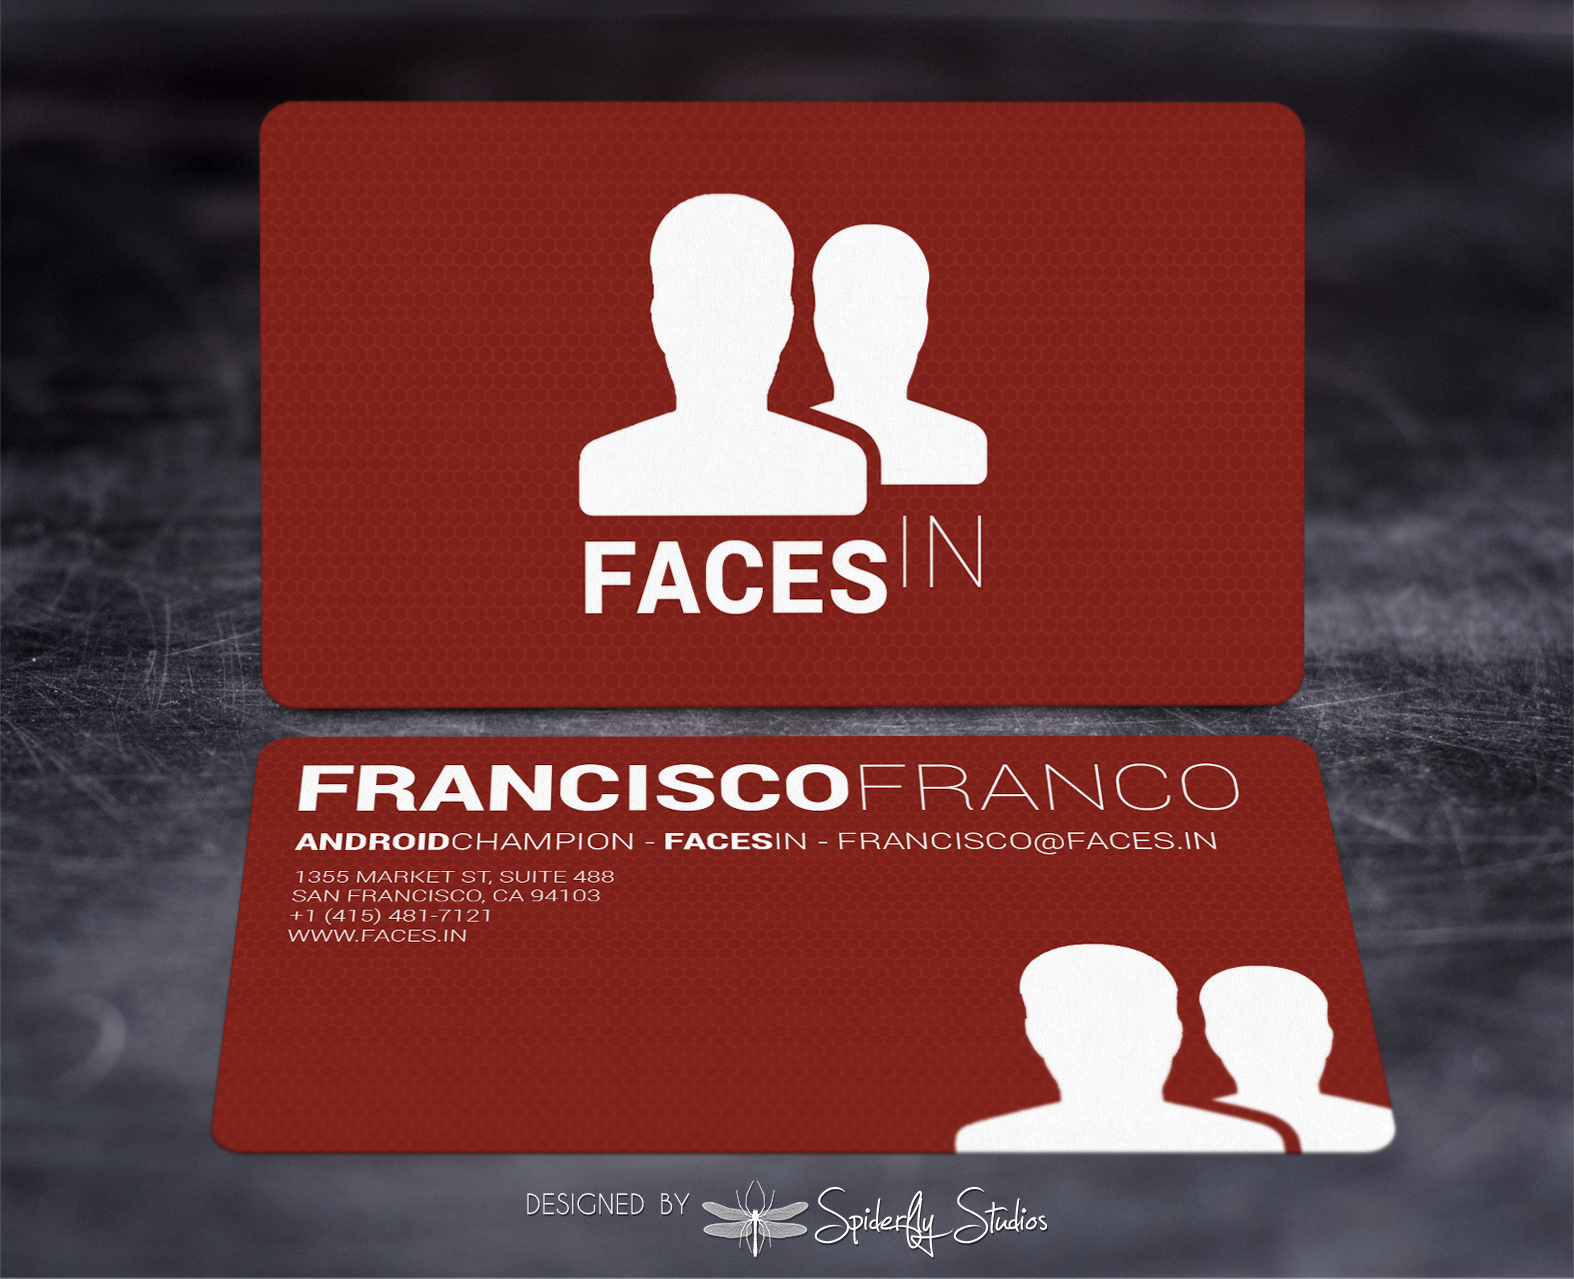 Faces In - Business Card Design